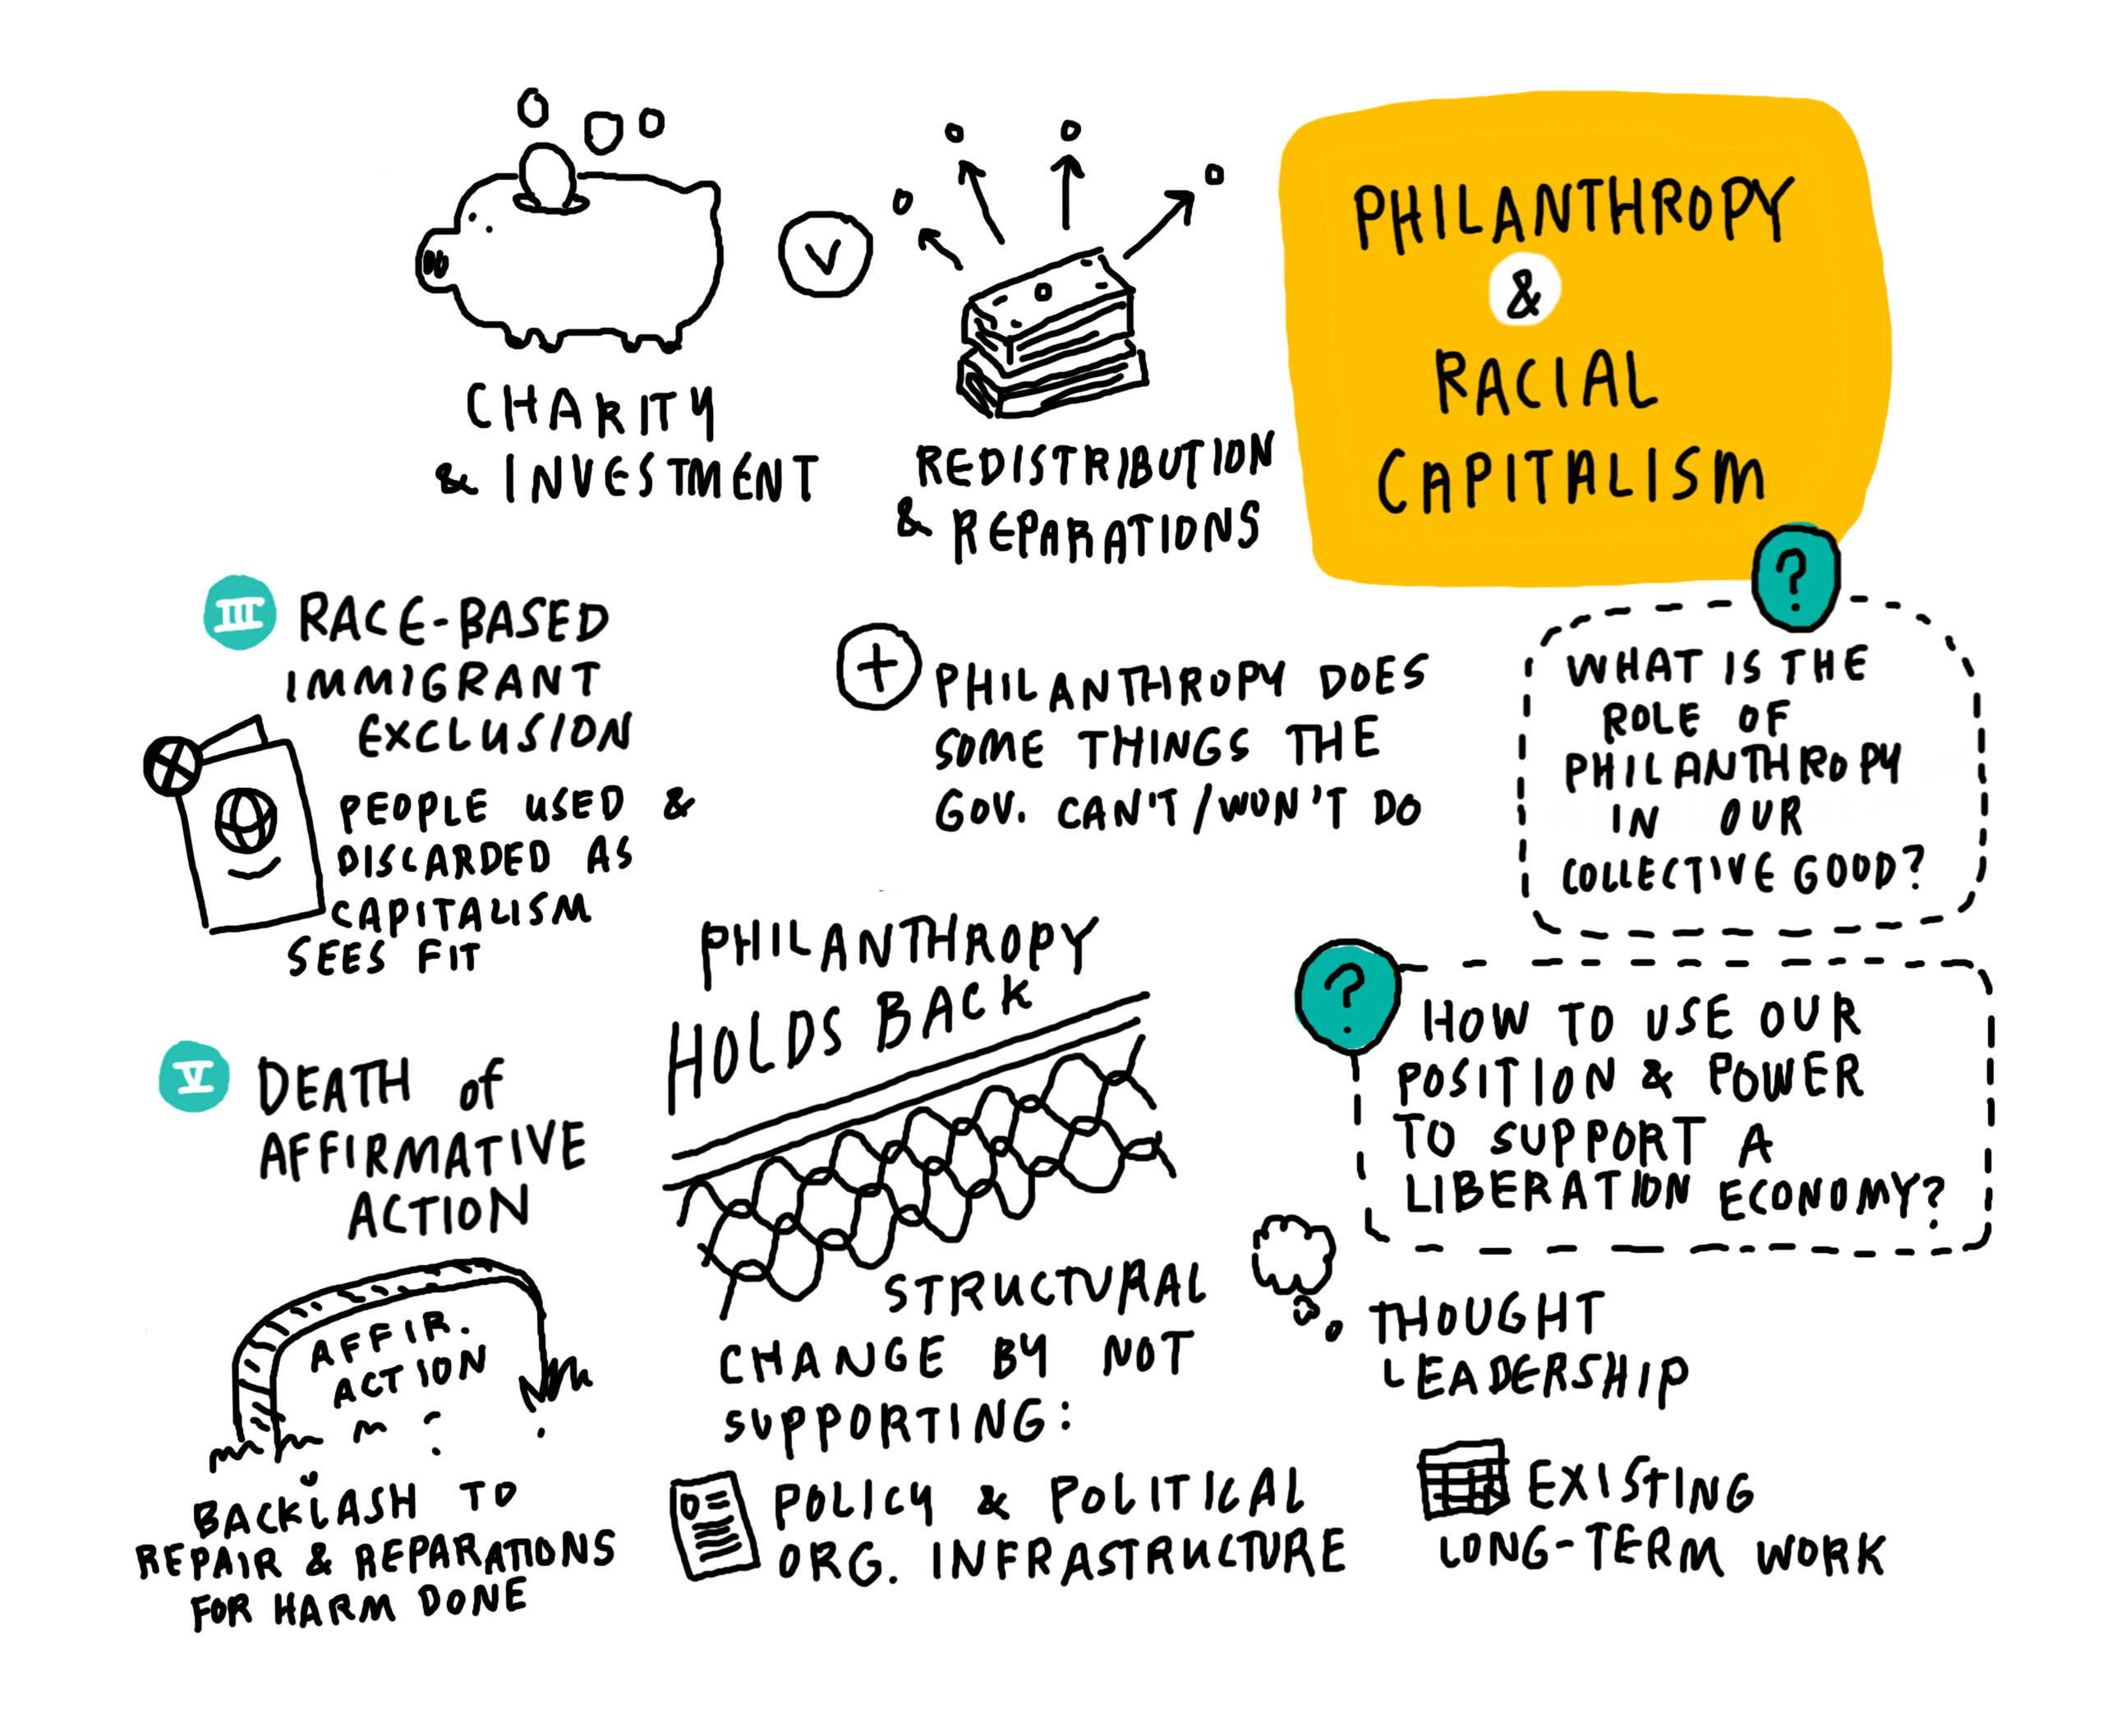 Graphic notes from a session on the connections between philanthropy and racial capitalism.